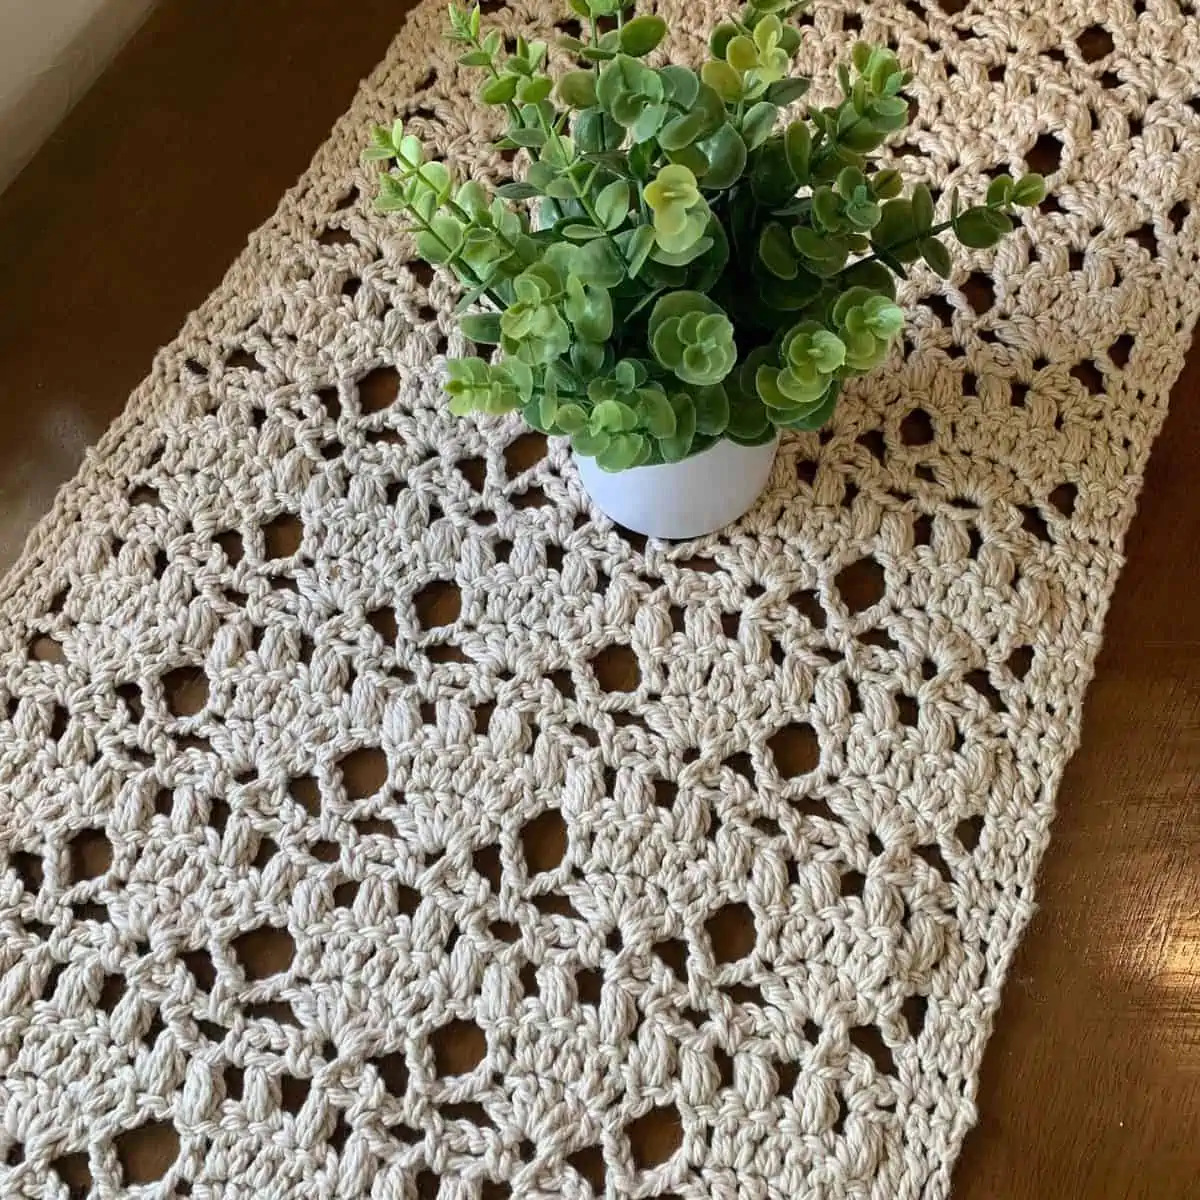 small vase of greenery sitting on a lace crochet table runner